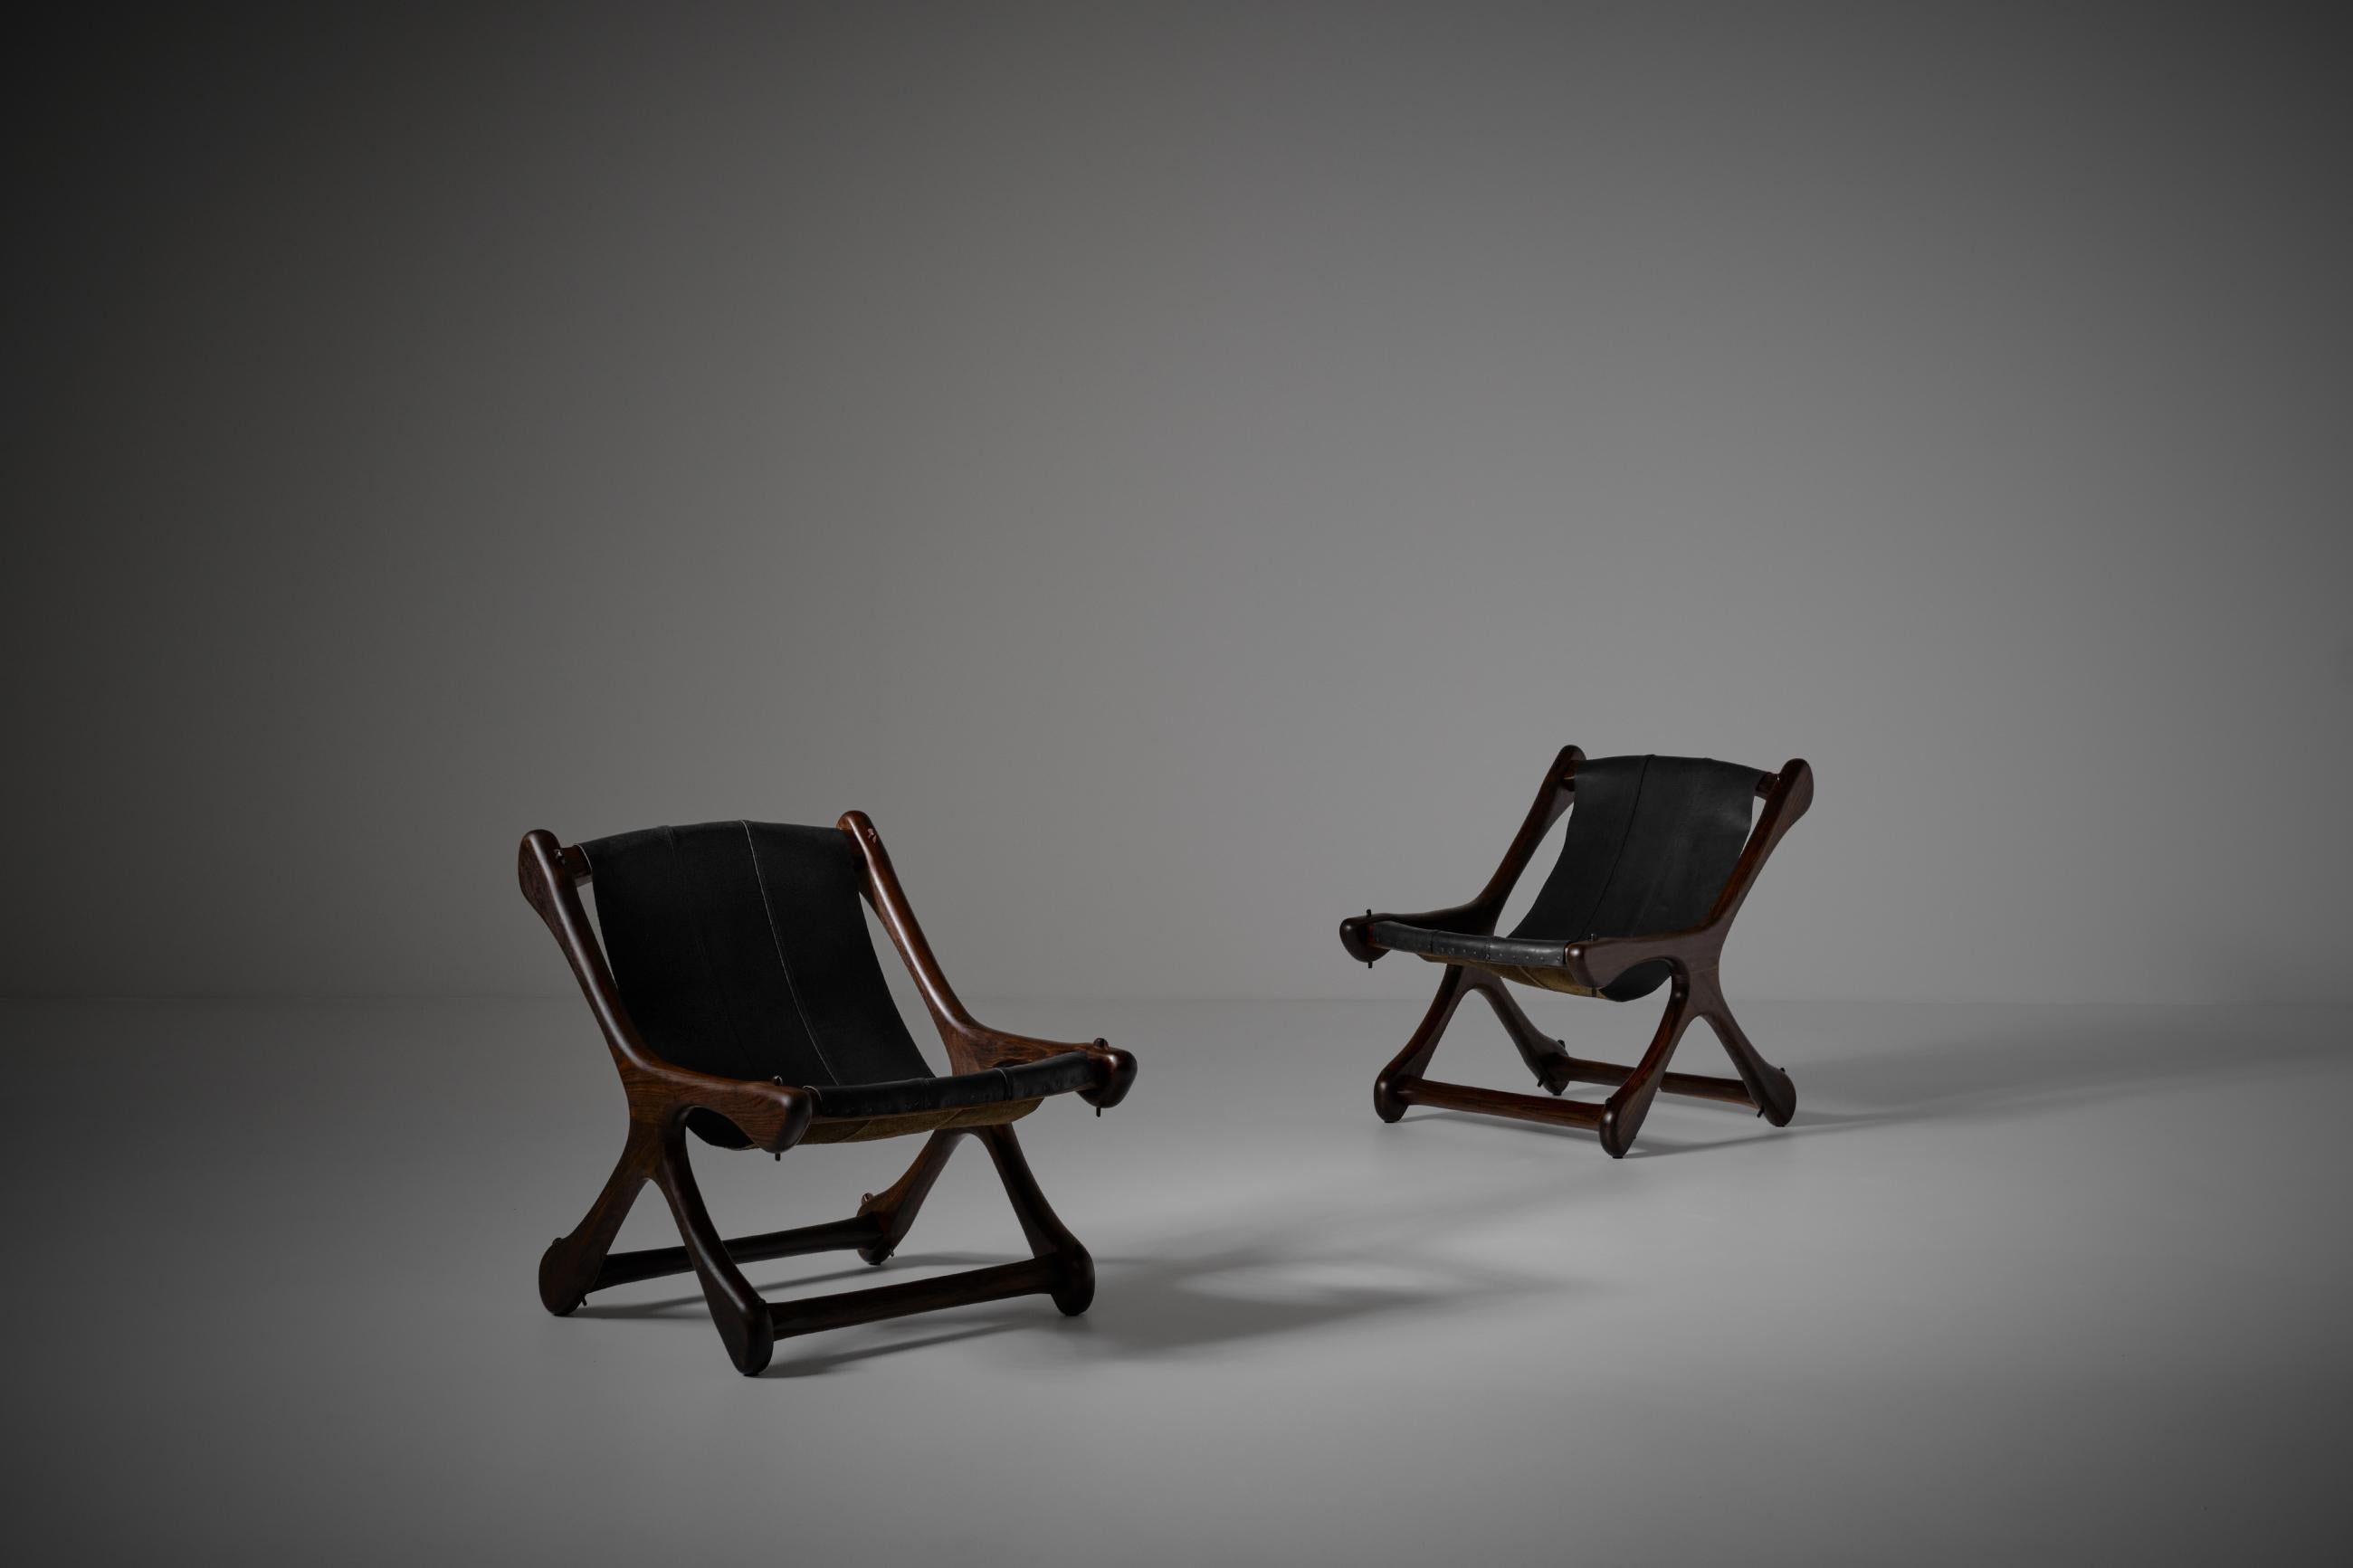 Pair of lounge chairs model 'Sloucher' by Don Shoemaker for Señal, Mexico 1960s. Outstanding organically shaped bone structure with a nice leather sling seat. Interesting shapes and stunning details such as the joints and solid wooden construction